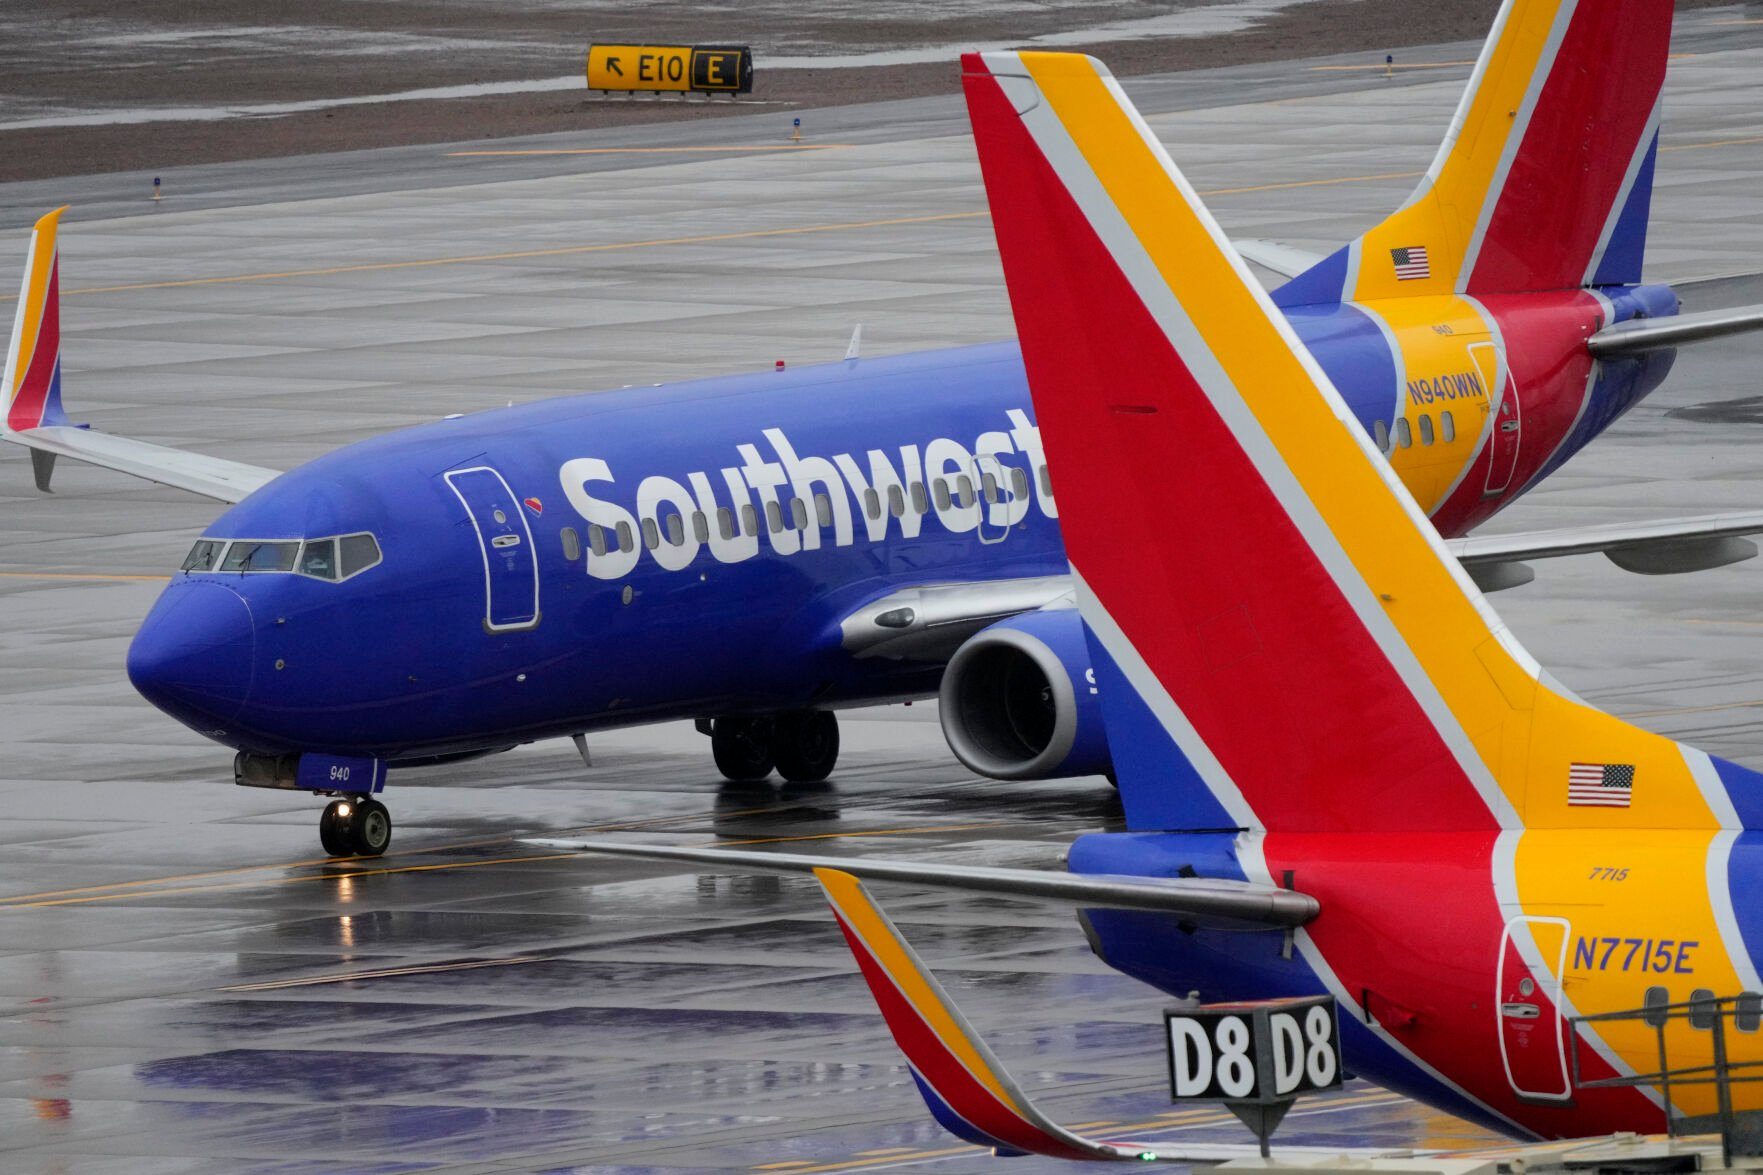 <p>FILE - A Southwest Airlines jet arrives at Sky Harbor International Airport in Phoenix on Dec. 28, 2022. Southwest Airlines will pay a $35 million fine as part of a $140 million agreement to settle a federal investigation into a debacle last December when the airline canceled thousands of flights and stranded more than 2 million travelers over the holidays. (AP Photo/Matt York, File)</p>   PHOTO CREDIT: Matt York 